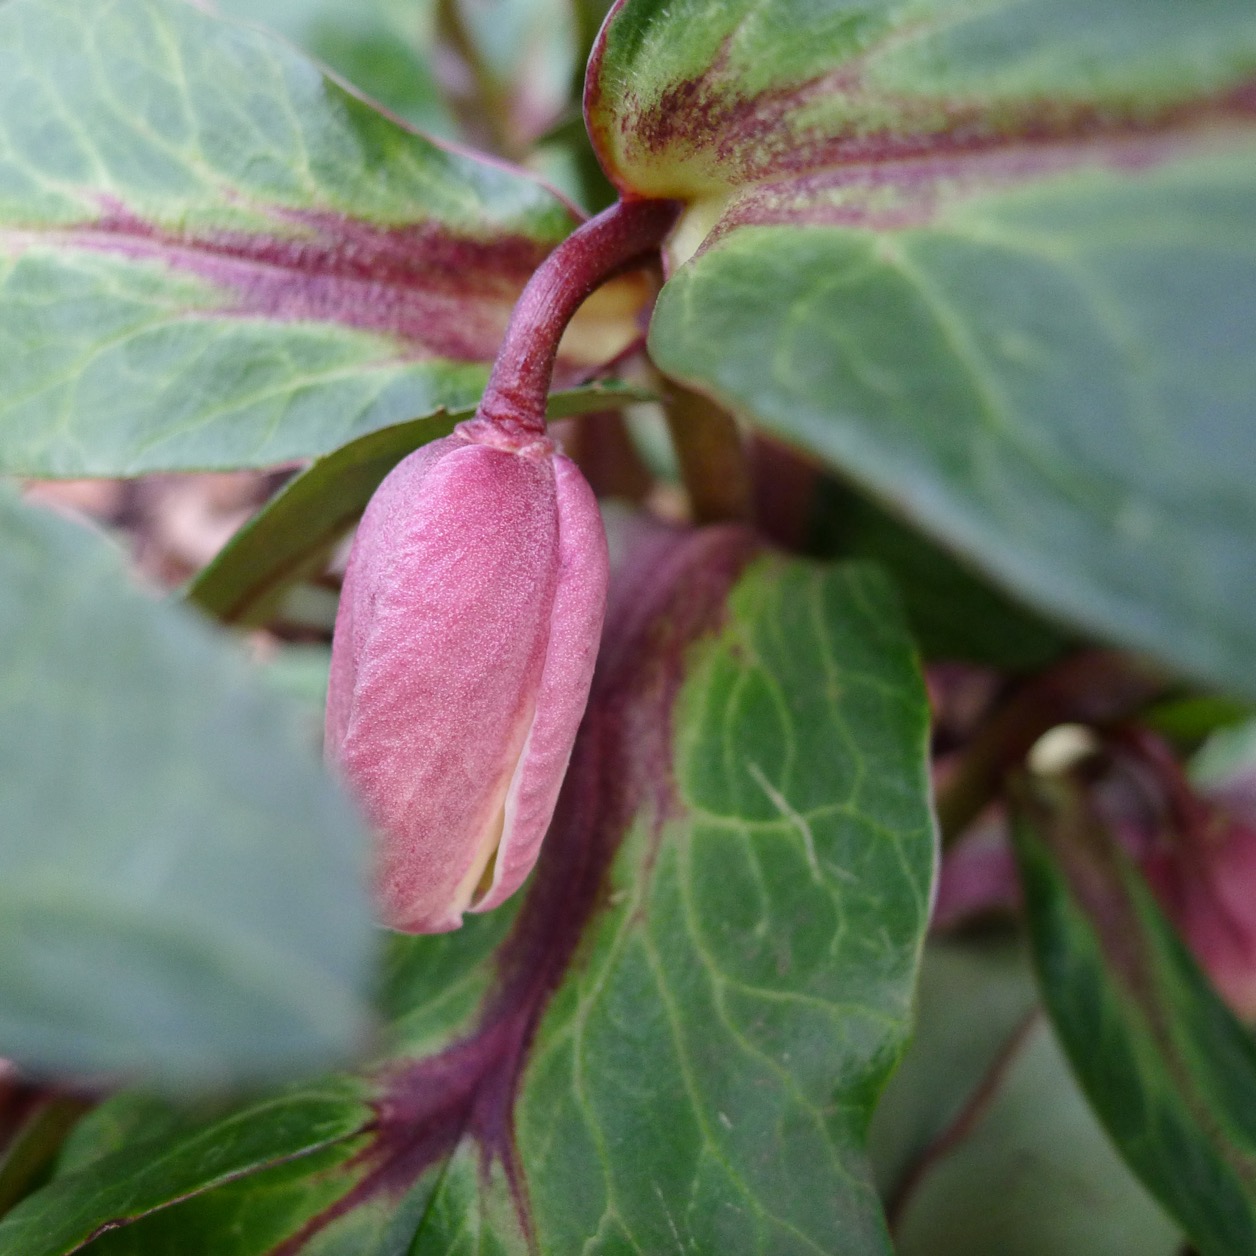 Small pink flower bud surrounded by green leaves